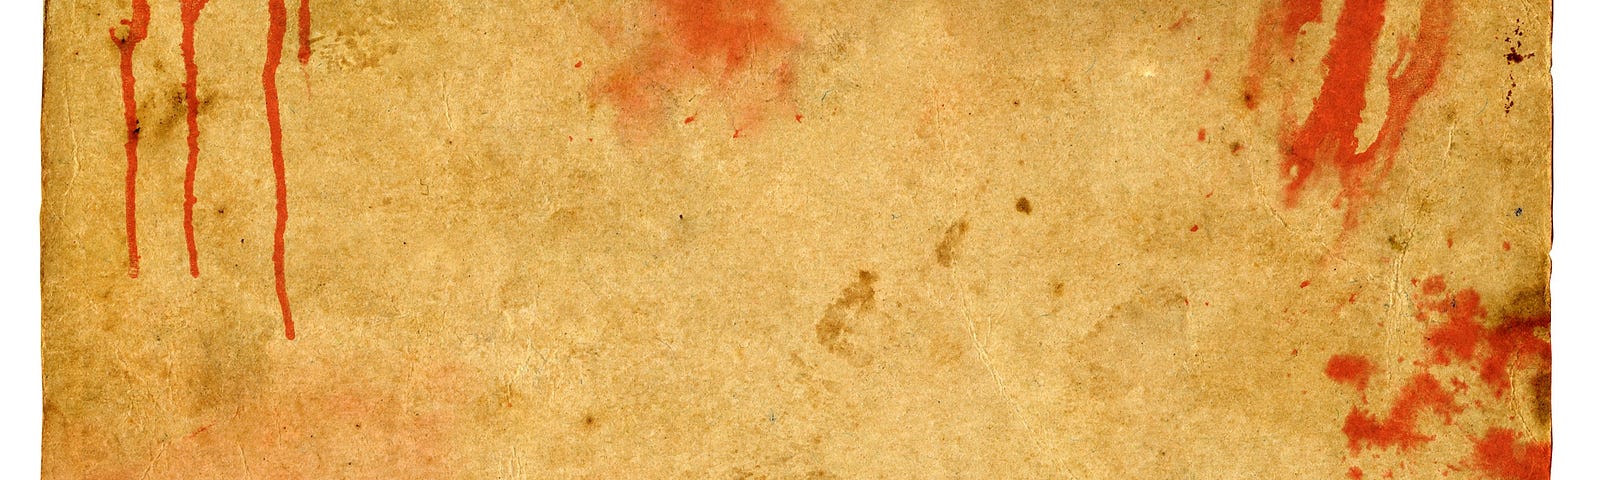 A mysteriously blank sheet of construction paper, with a torn corner and blood splotches